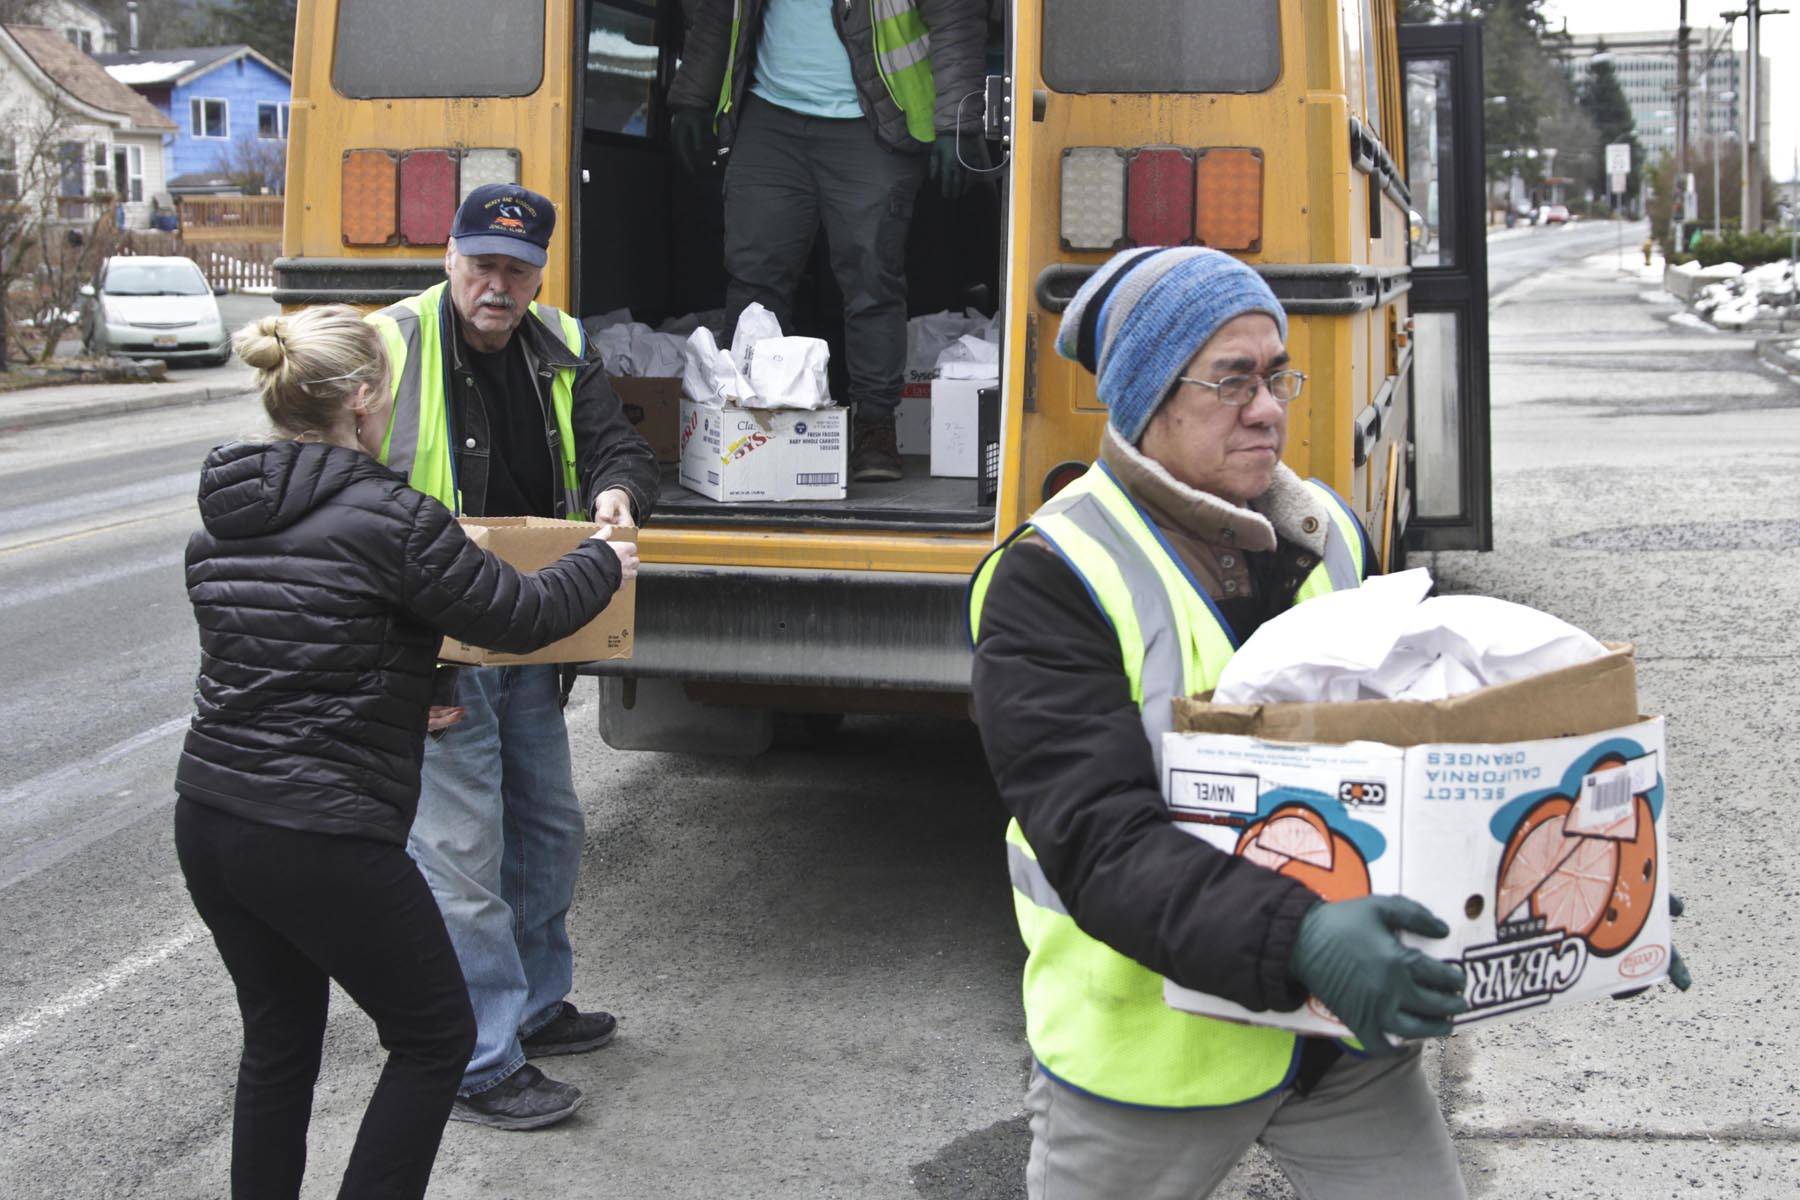 First Student employees and Juneau School District food services supervisor Adrianne Schwartz, left, carry student meals off the bus they’re being distributed from near Juneau-Douglas High School:Yadaa.at Kalé, March 16, 2020. (Michael S. Lockett | Juneau Empire)